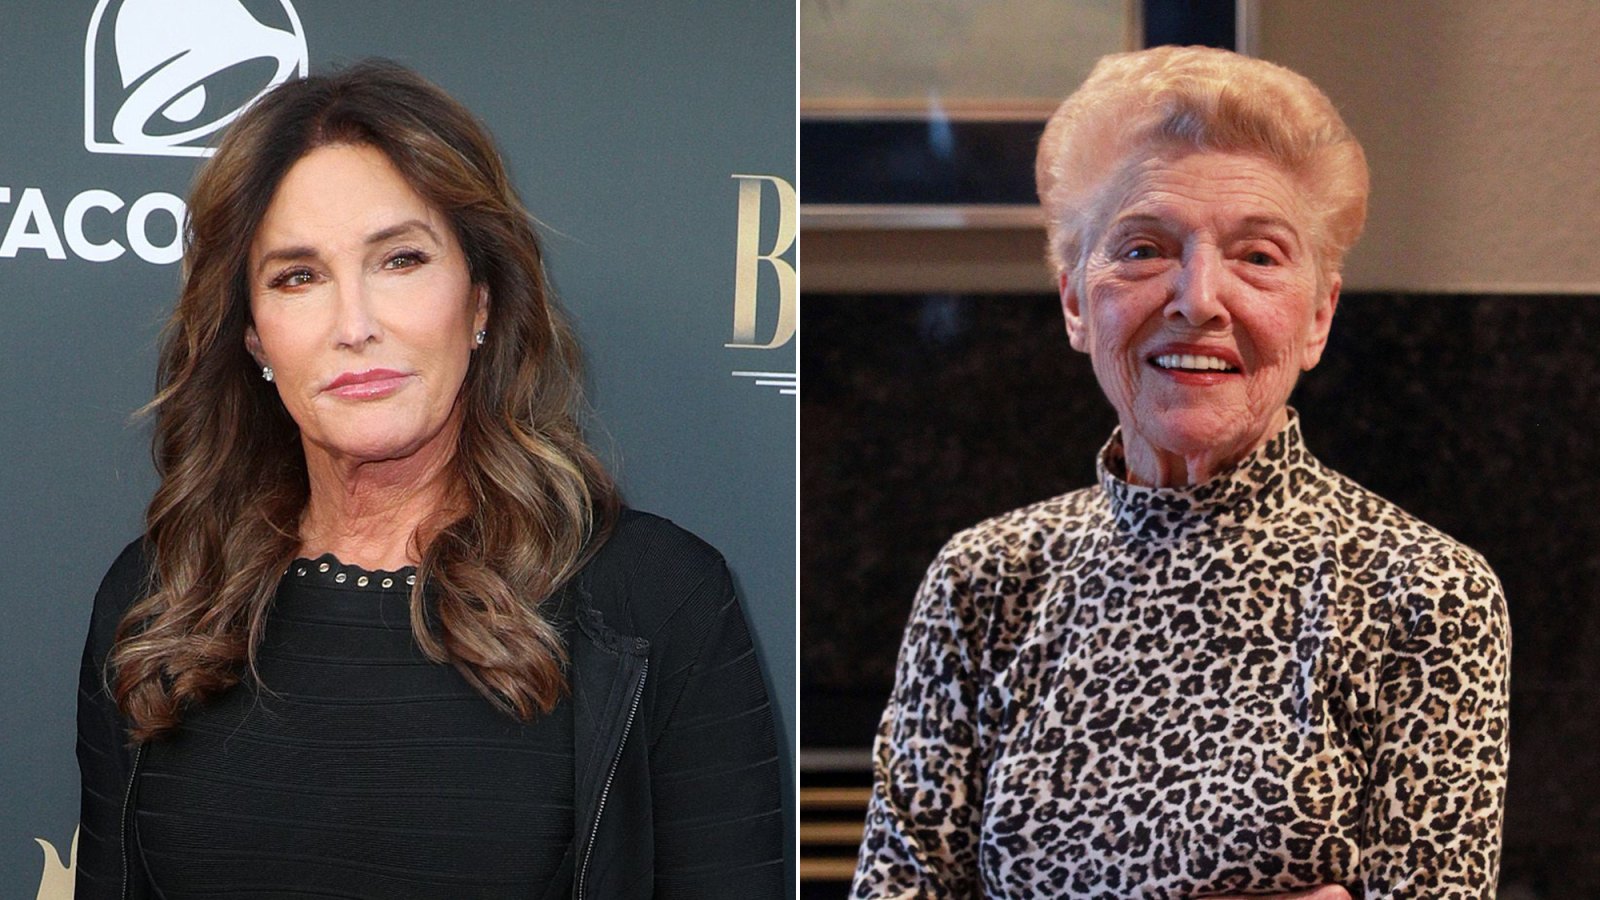 Caitlyn Jenner’s Mom Doesn’t Understand Why ‘Keeping Up With the Kardashians’ Is So Popular